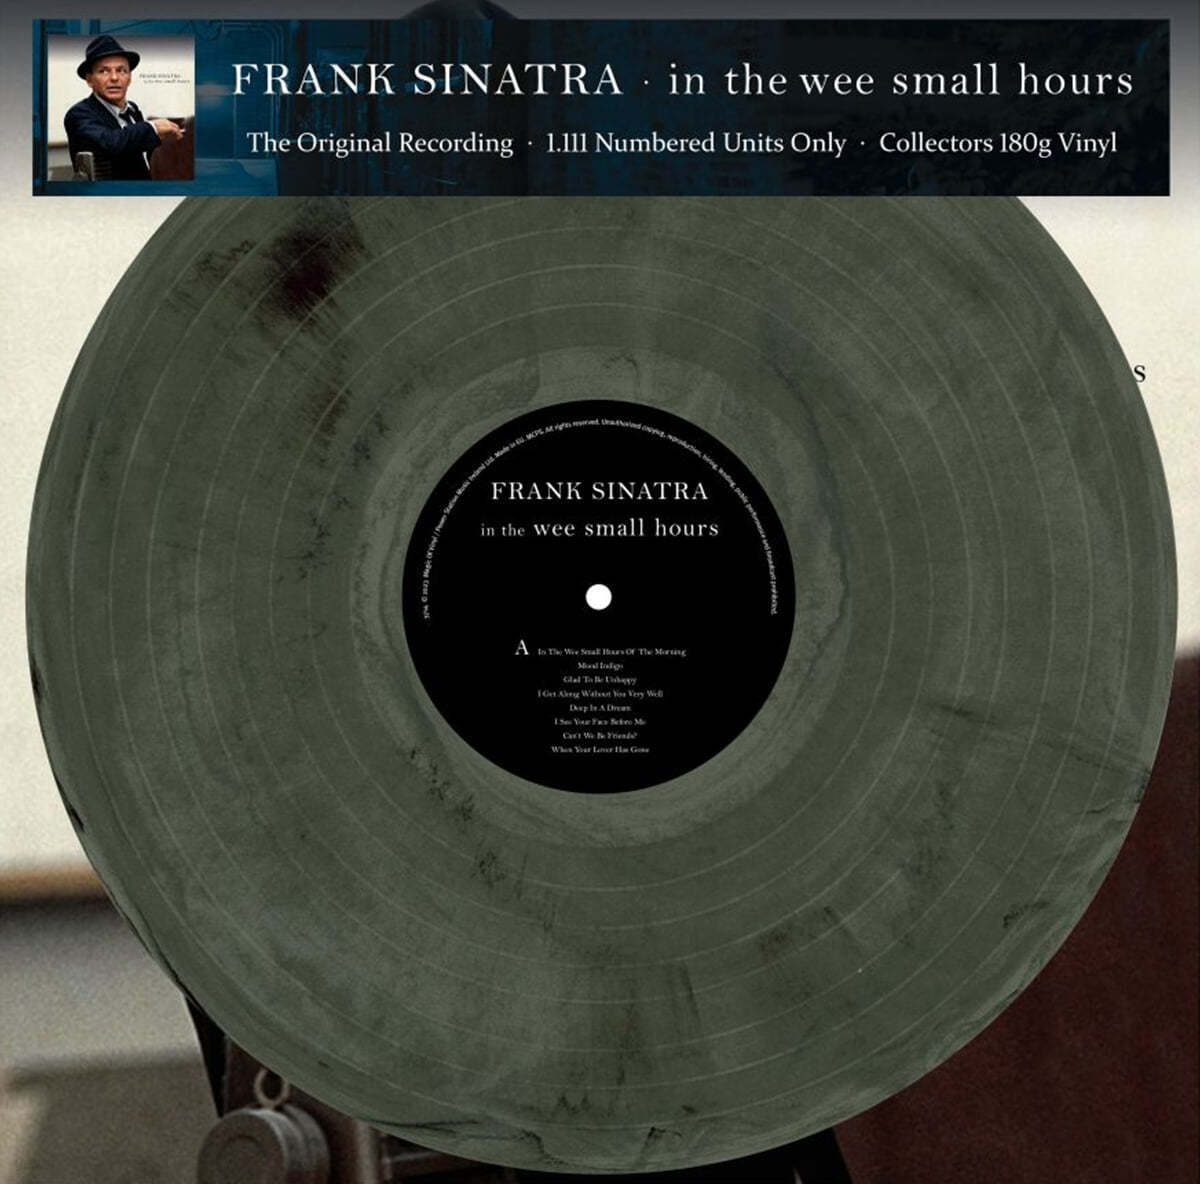 Frank Sinatra (프랭크 시나트라) - In The Wee Small Hours (The Original Recording) [카키 마블 컬러 LP]